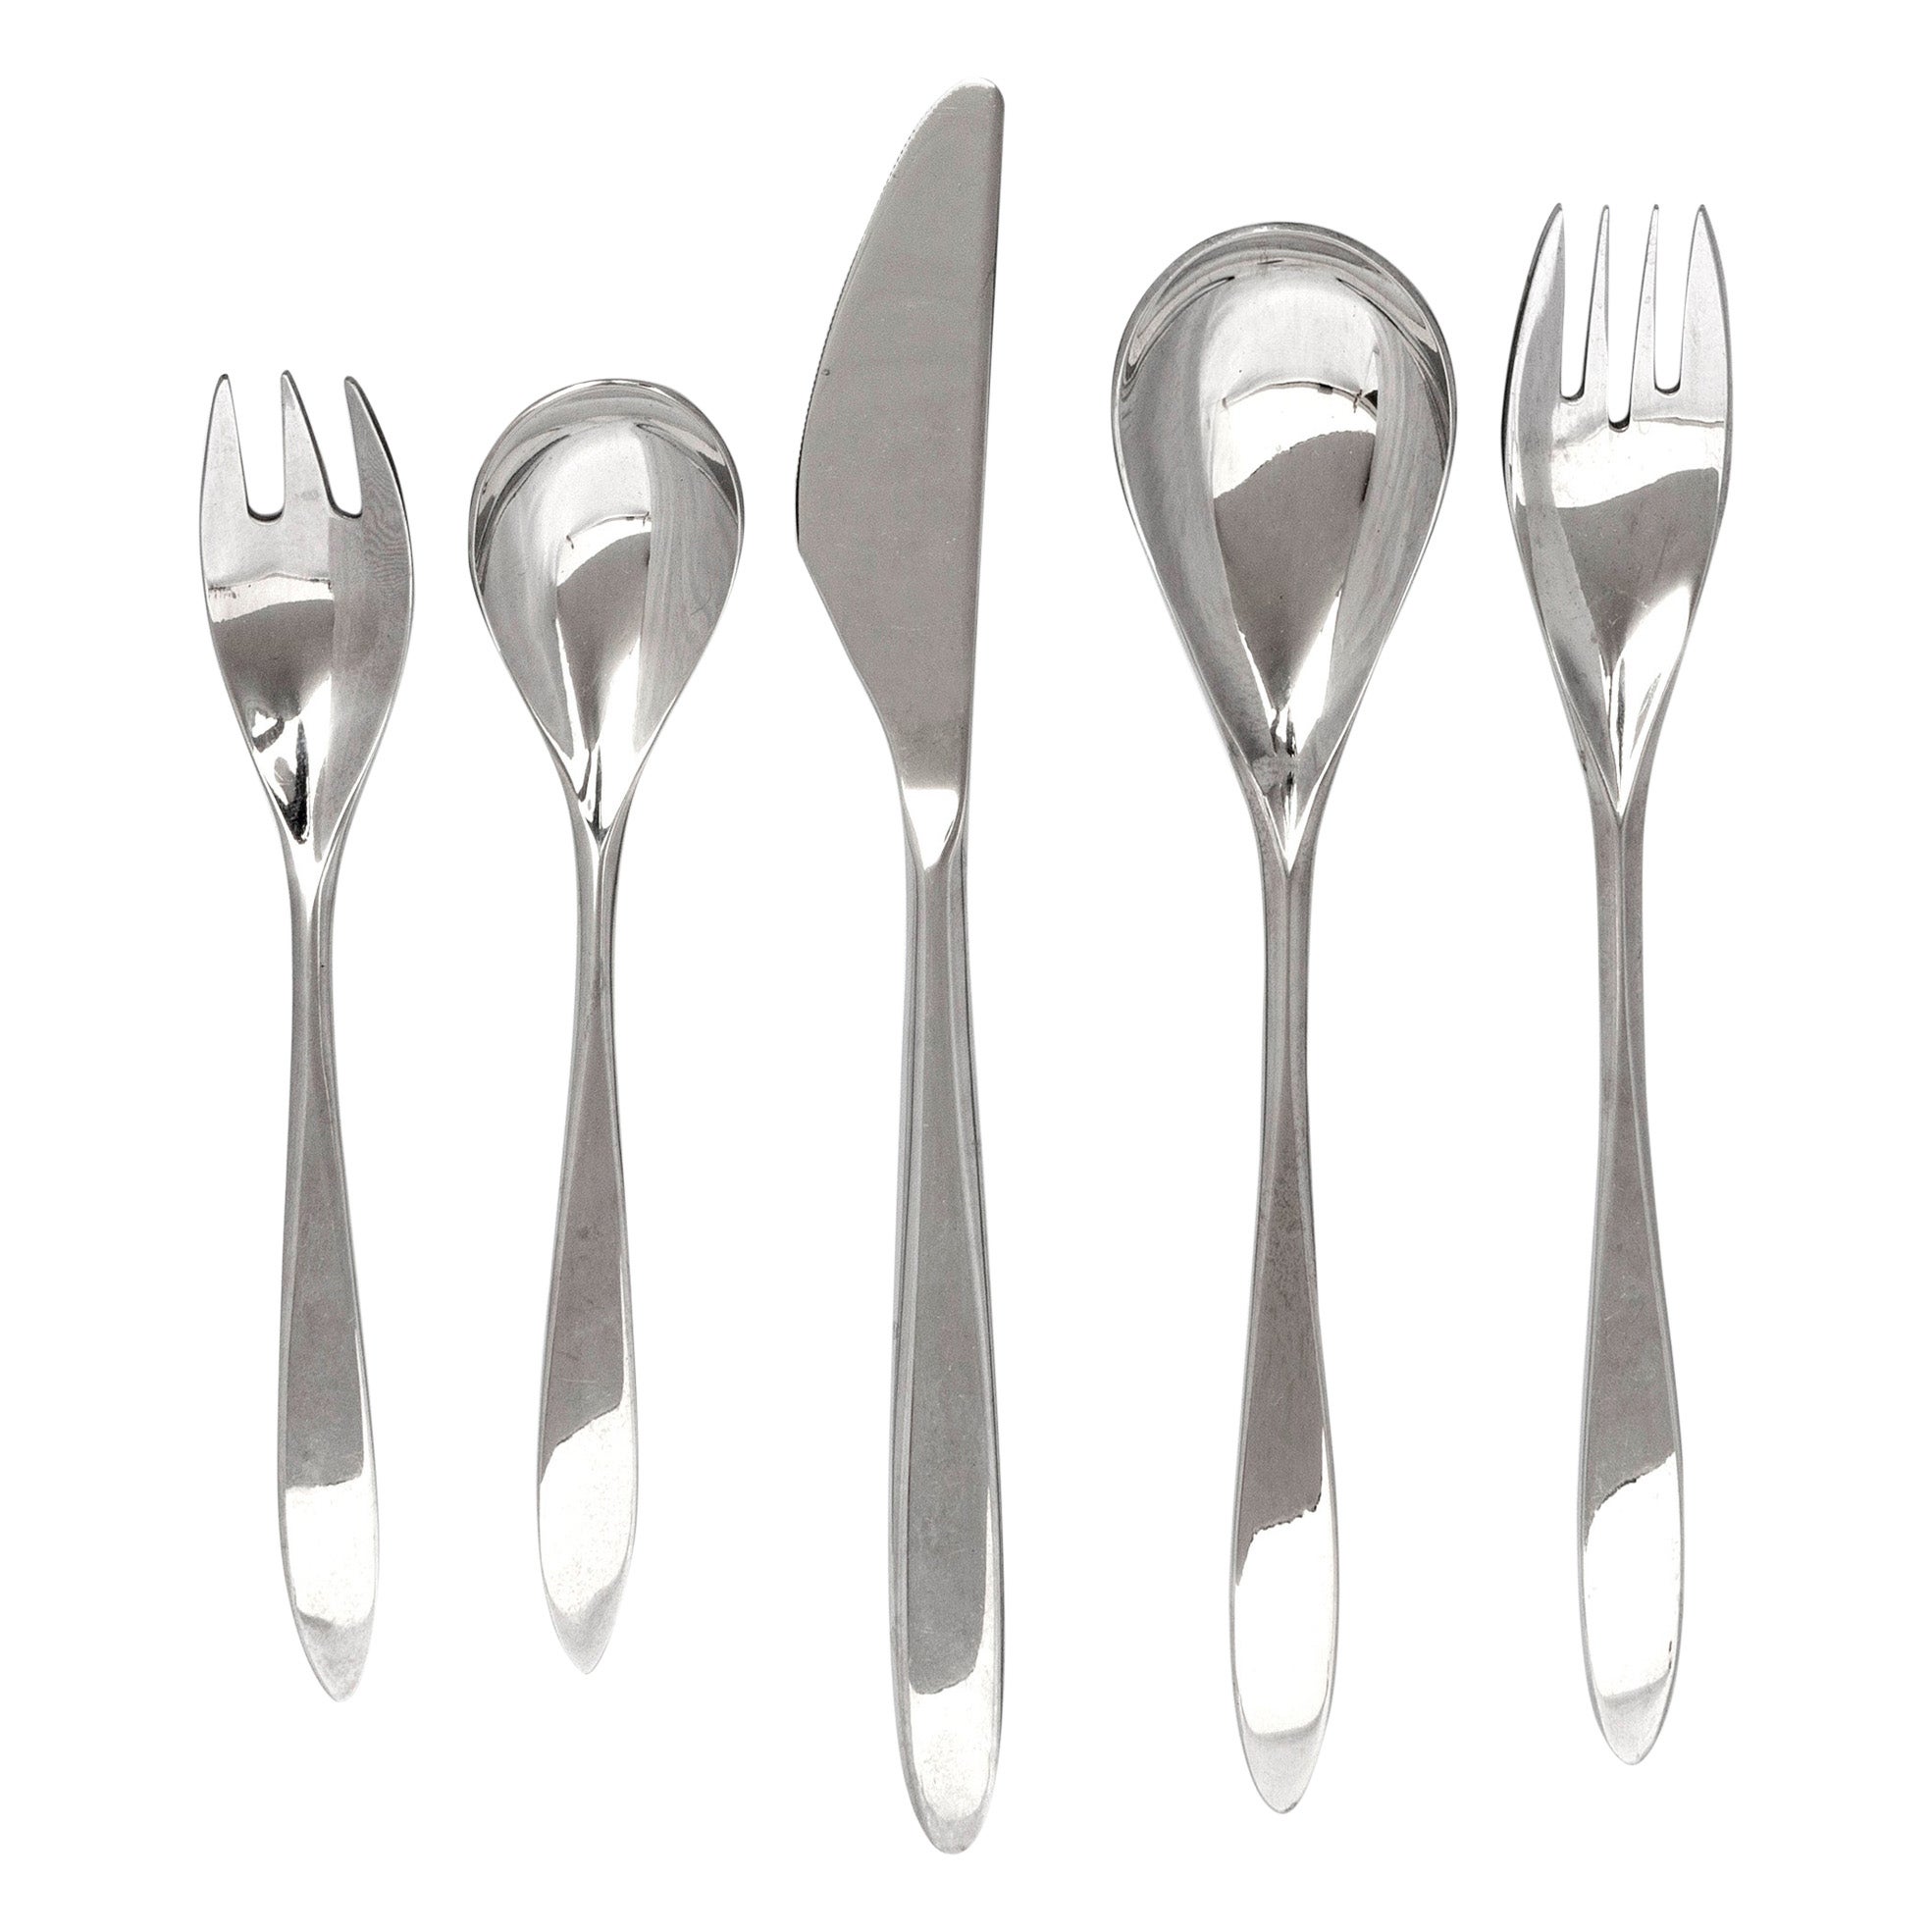 Scandinavian Modern Style Stainless-Steel Flatware by Oxford Hall; 60 pieces